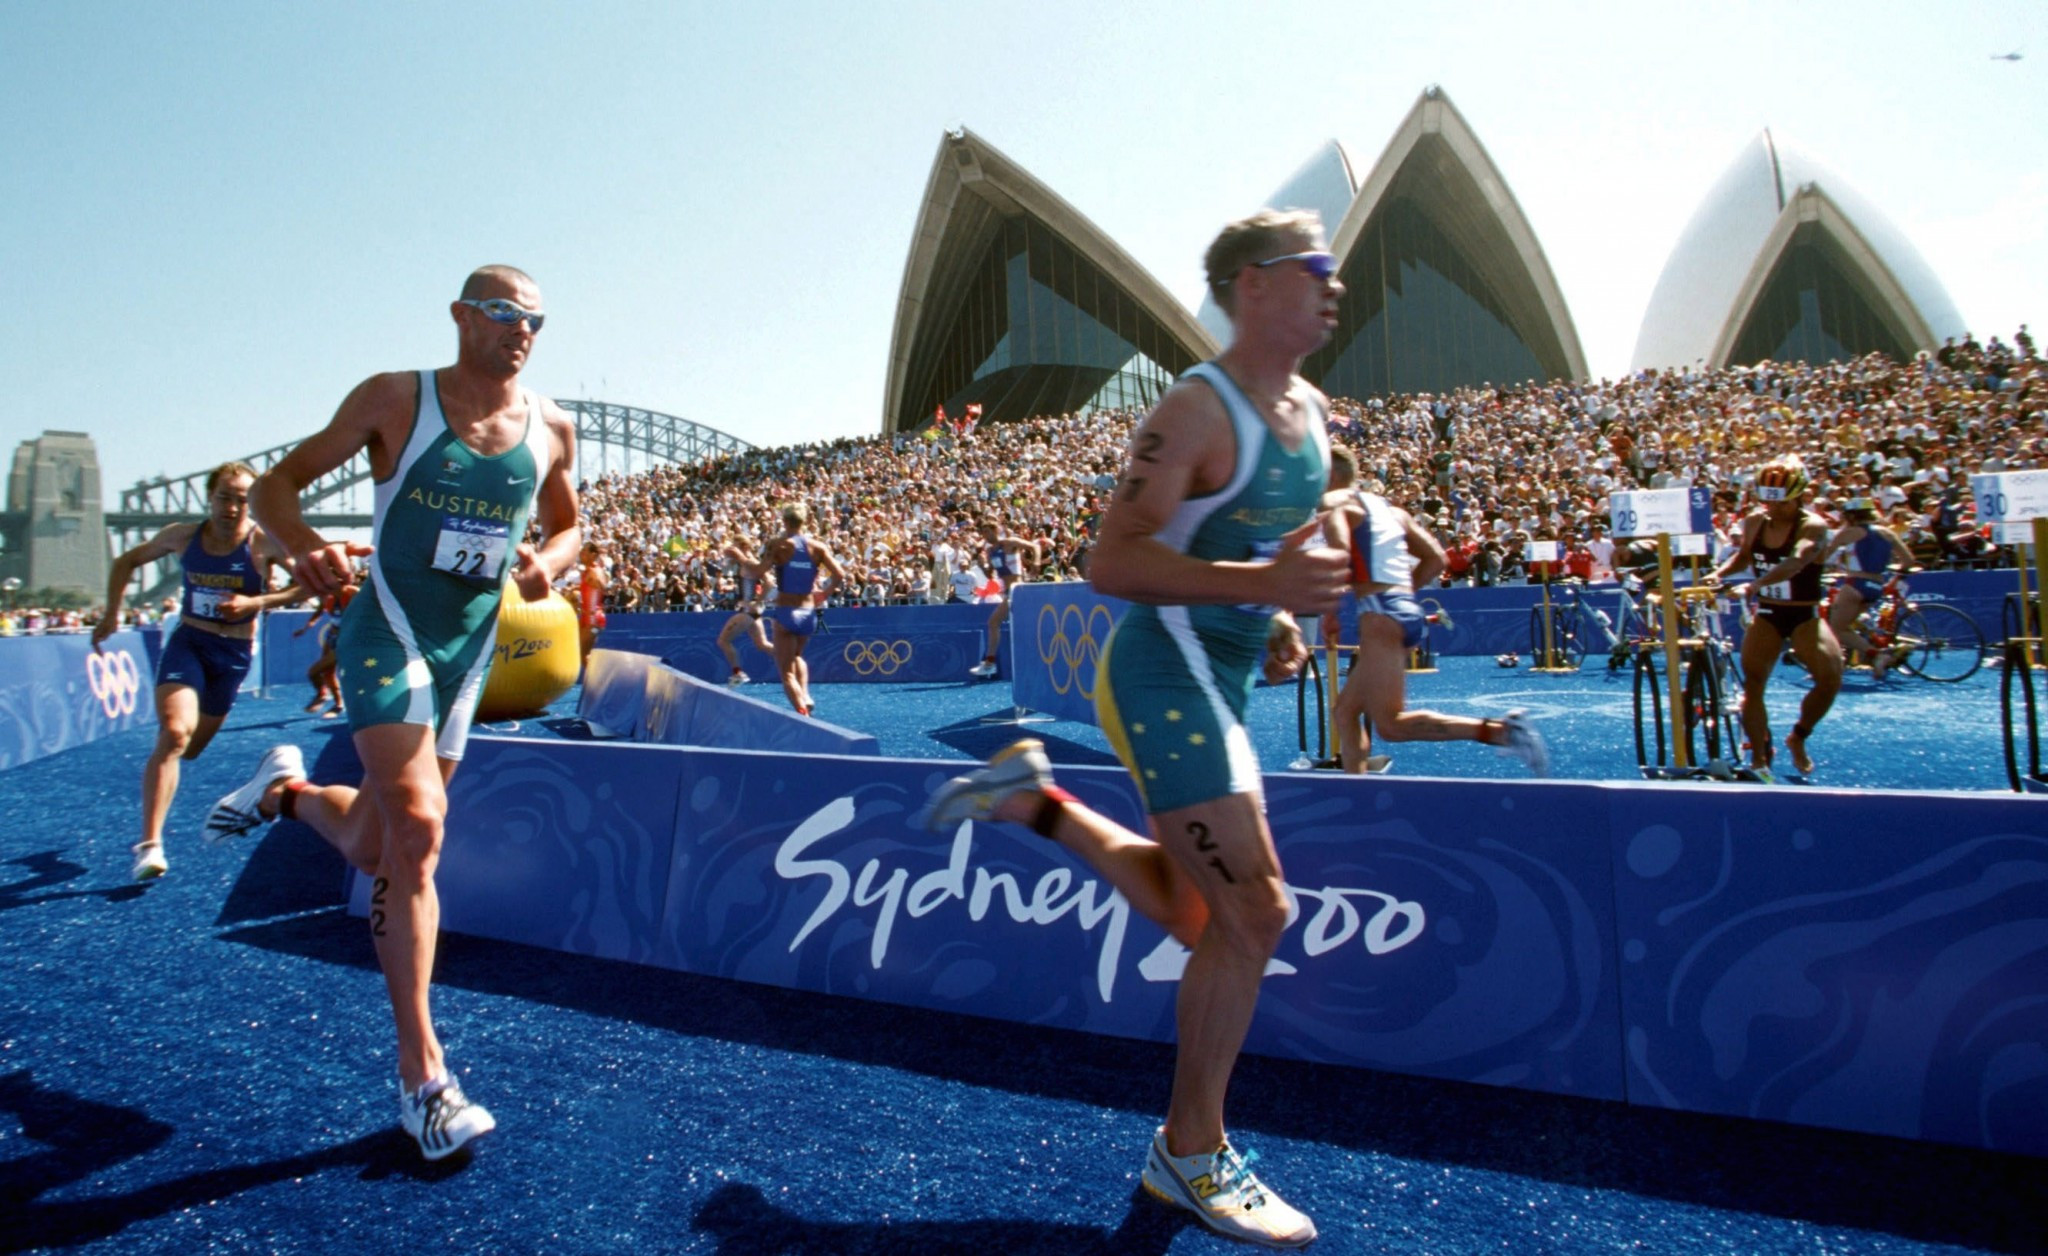 Triathlon made its Olympic debut at Sydney in 2000 only 26 years after the first event was held ©Getty Images